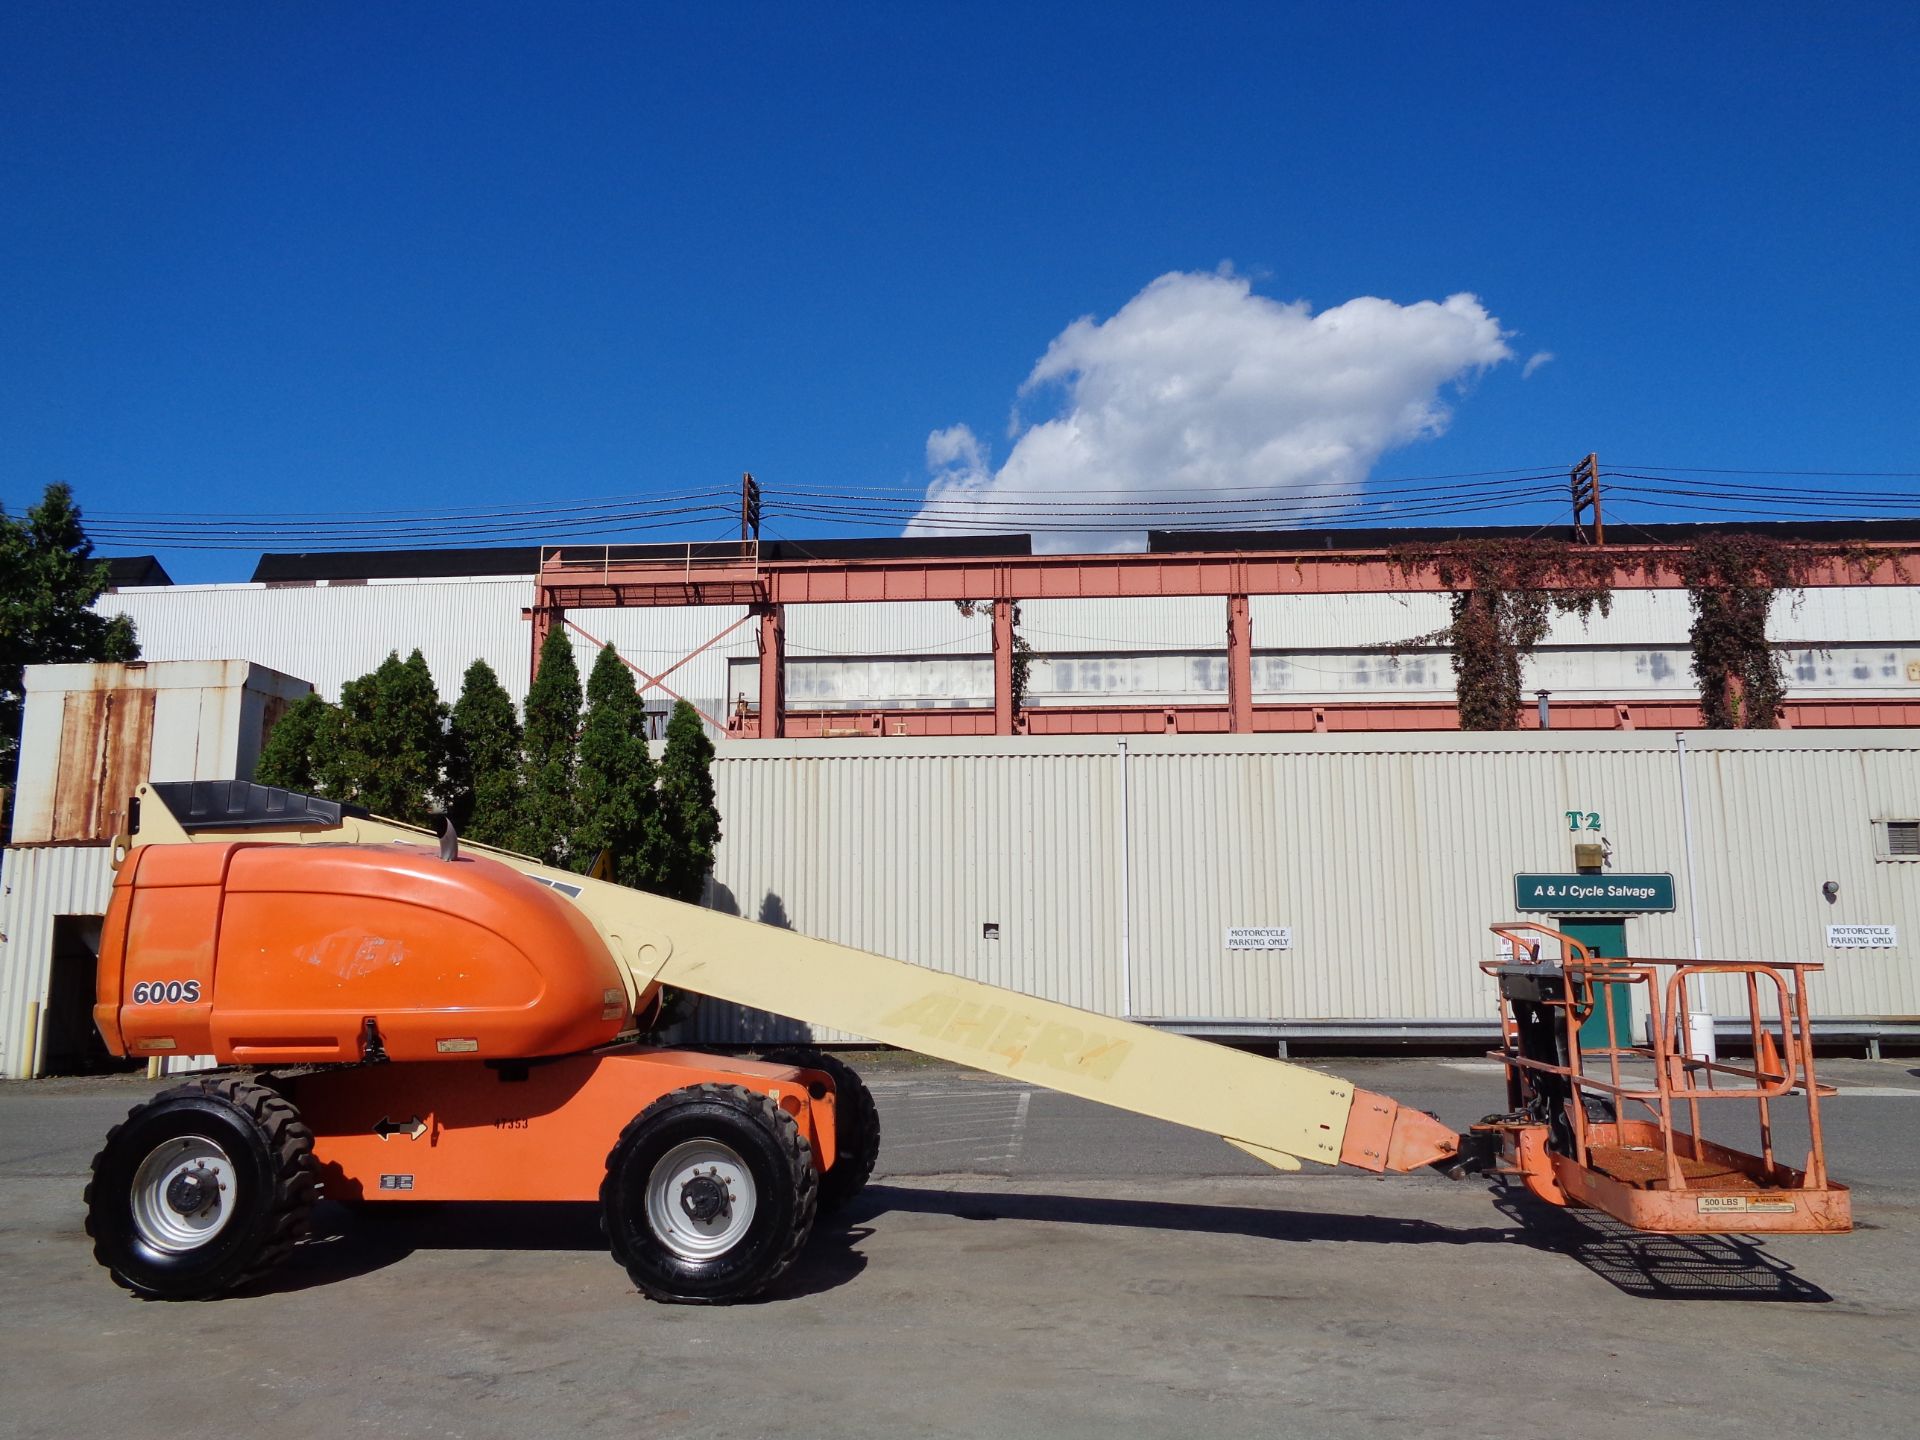 JLG 600S Boom Lift - 4x4 - 60ft Height - Image 12 of 19